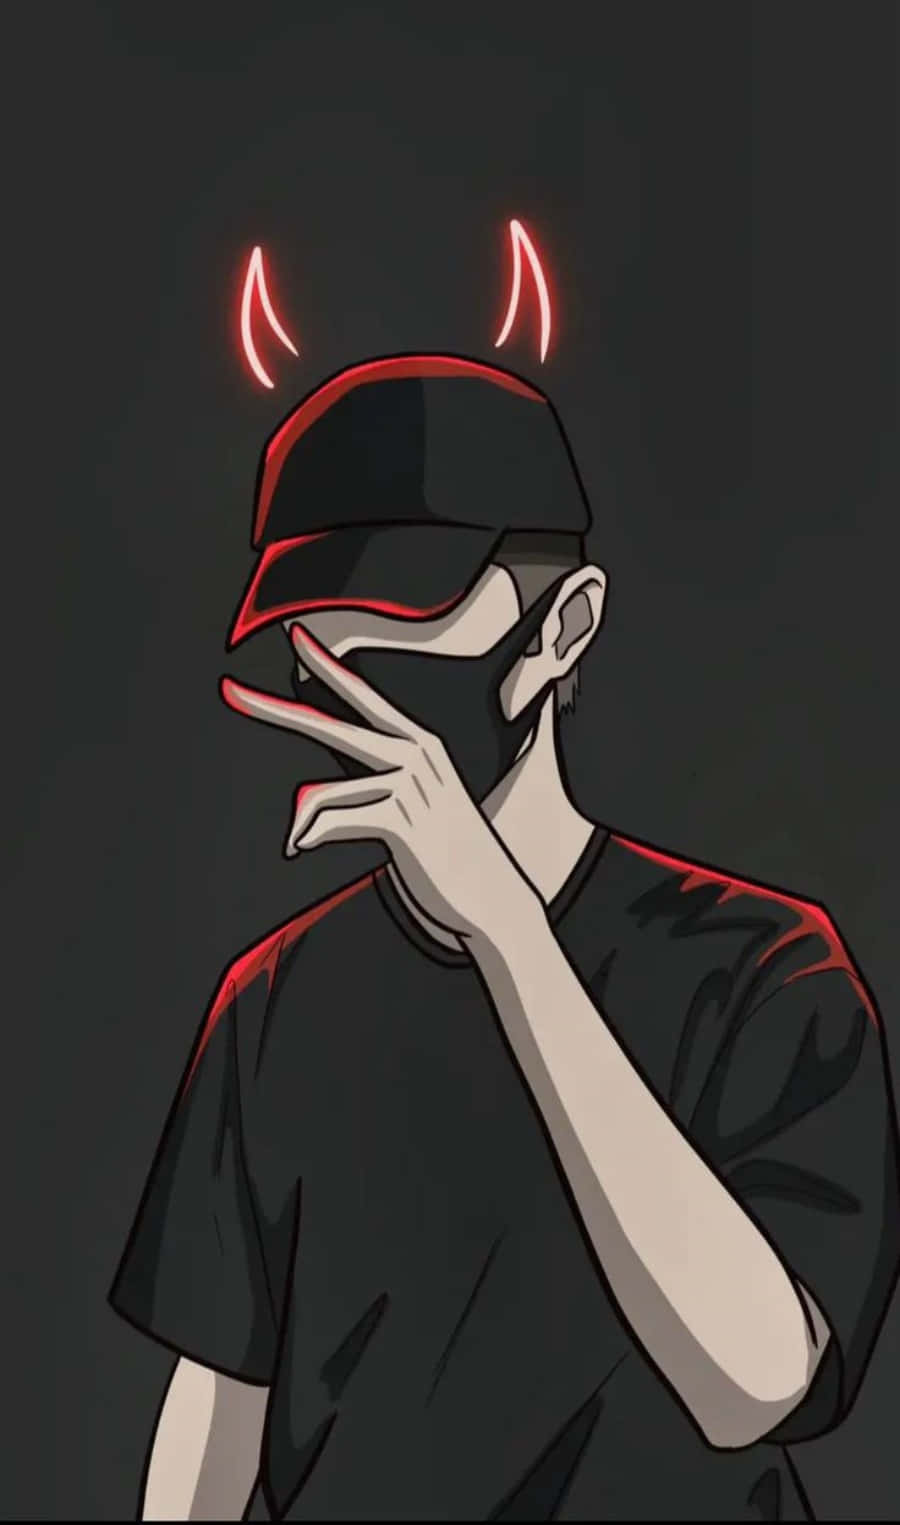 Cool Guy With Neon Red Horns Digital Art Wallpaper